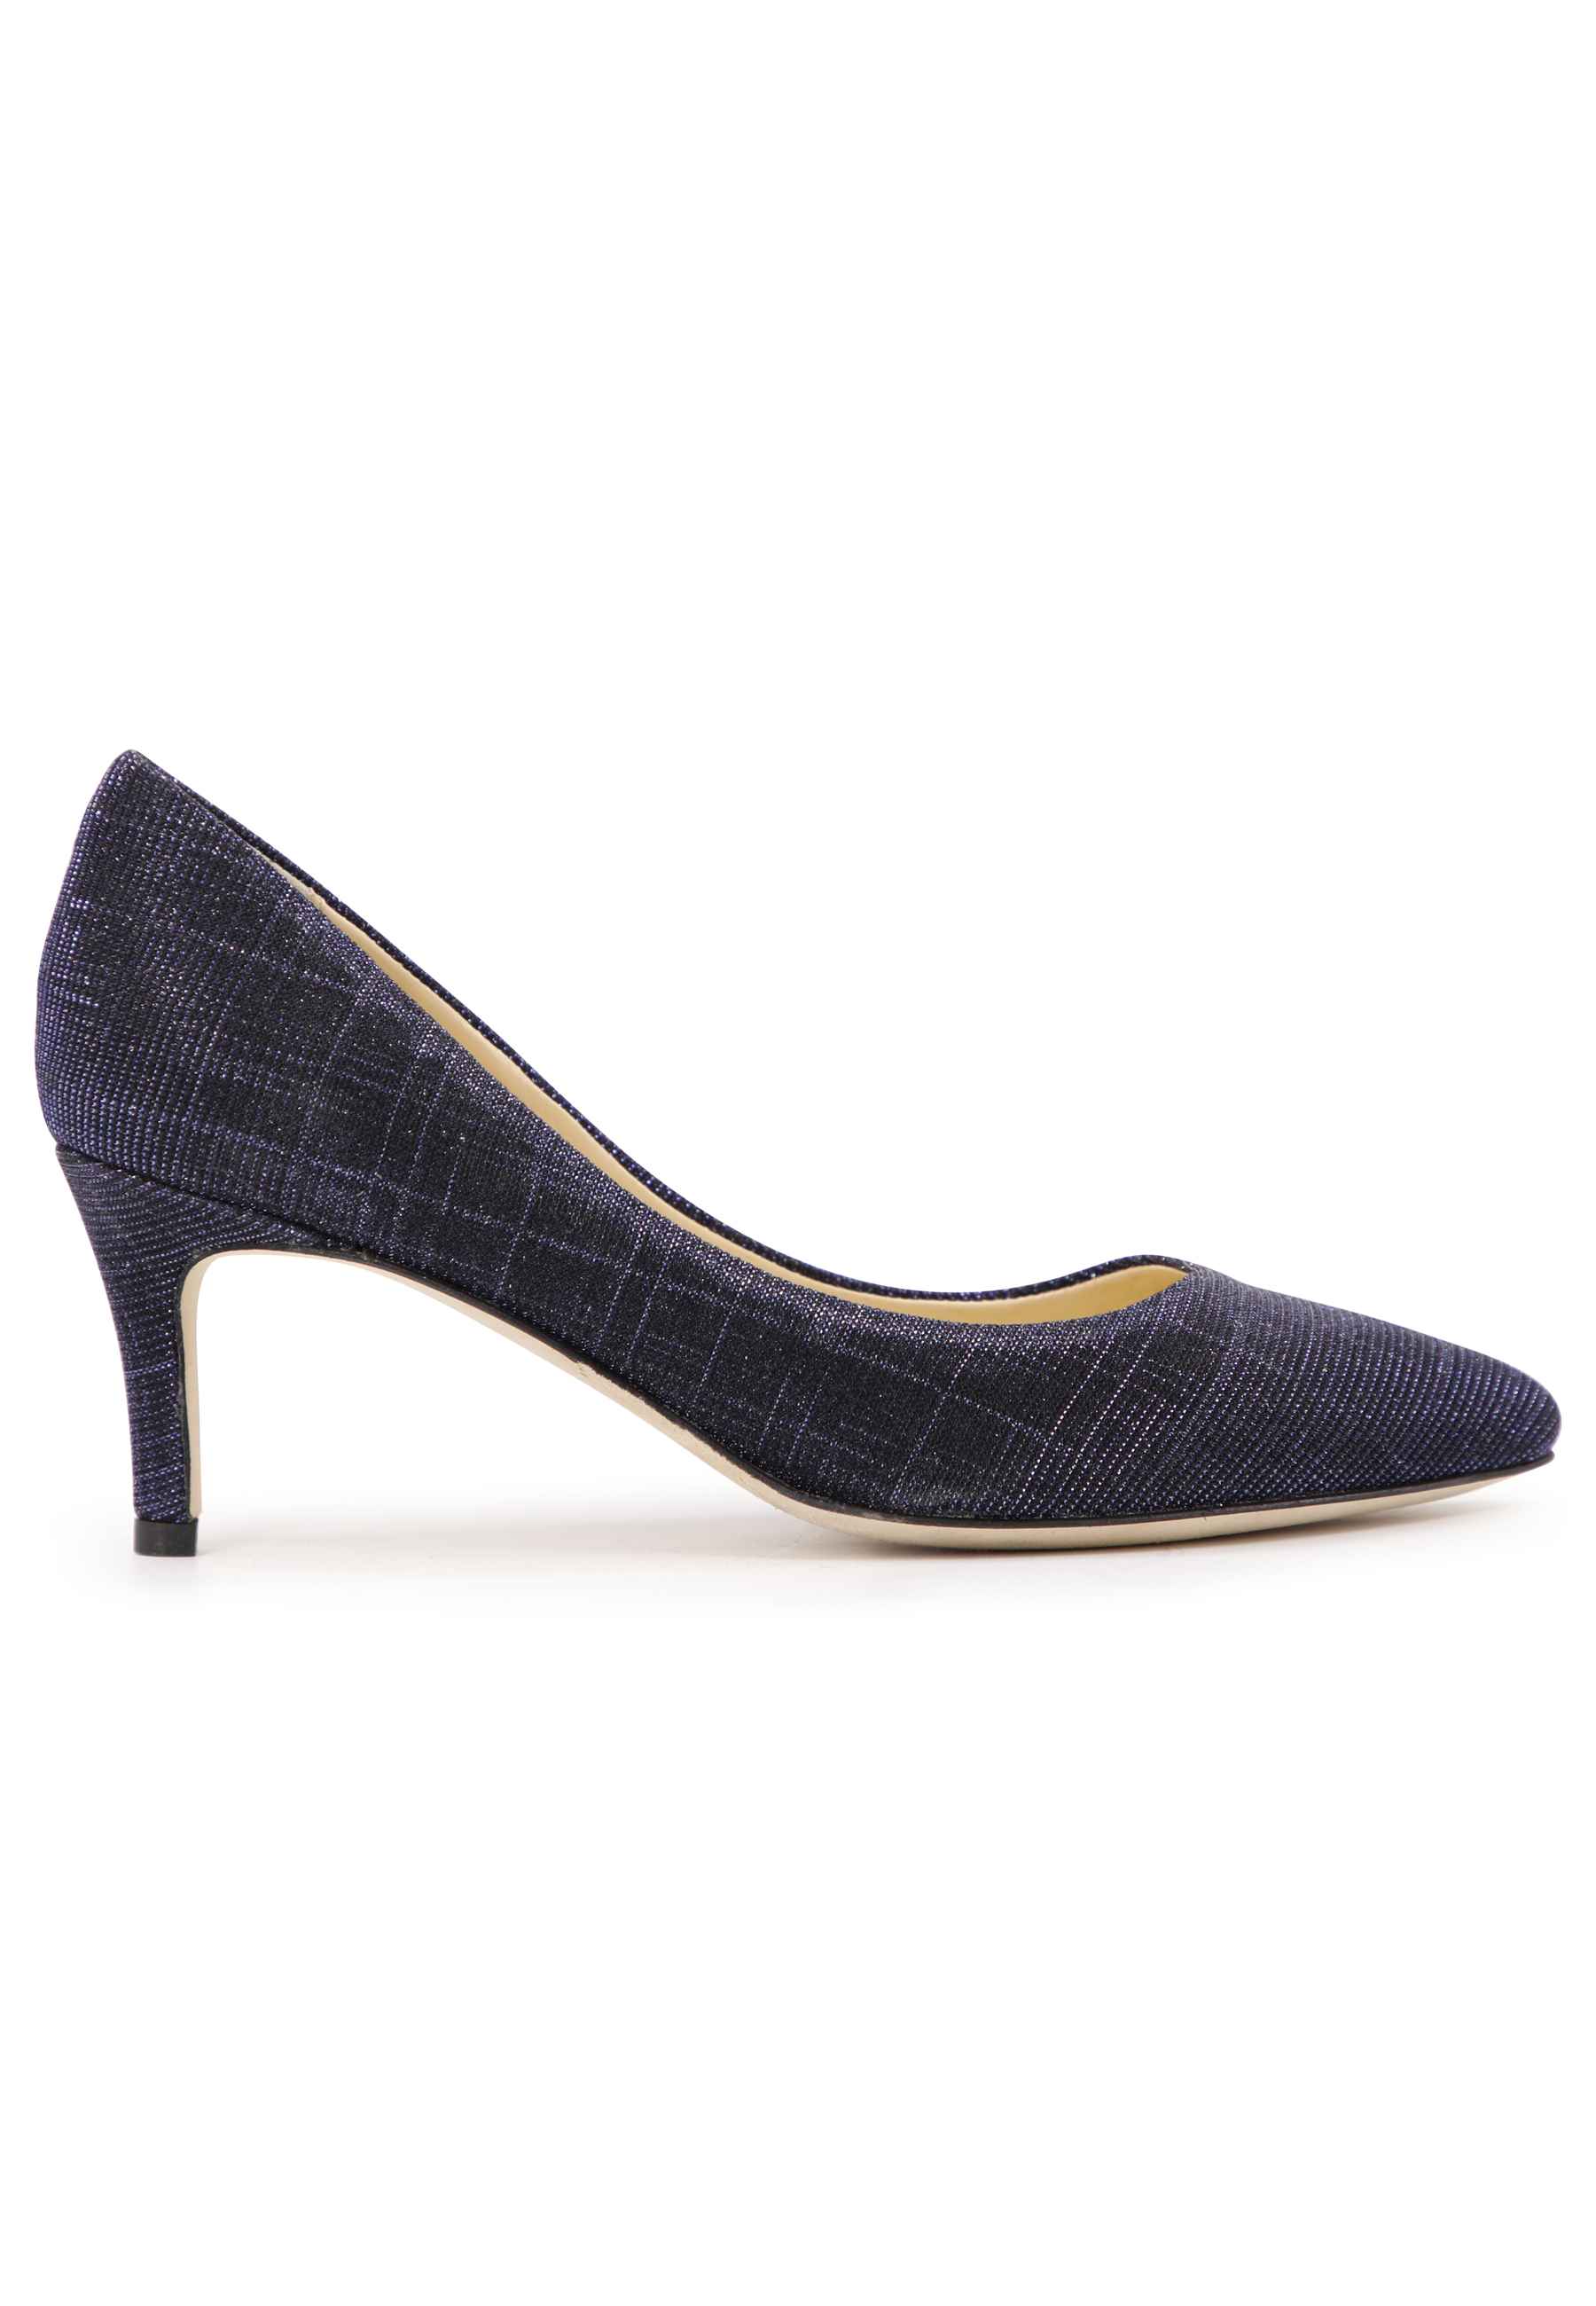 Women's decollete in blue lux fabric with thin heel